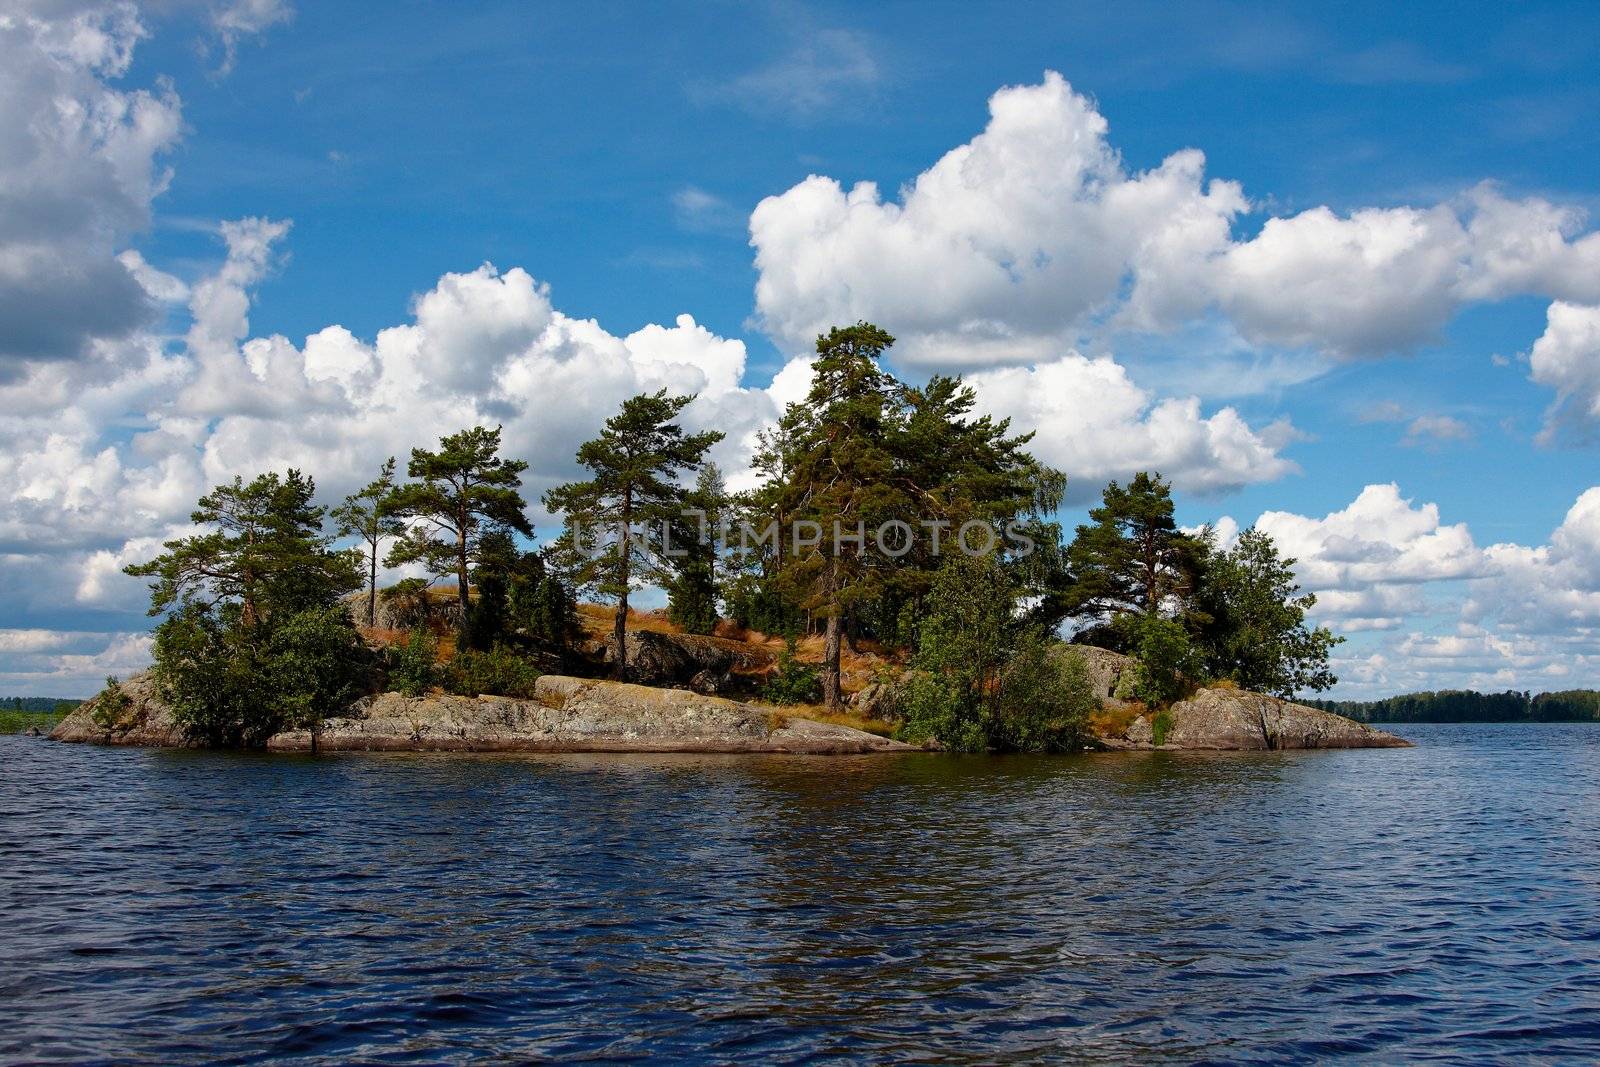 The island on the lake under the dark blue sky with clouds